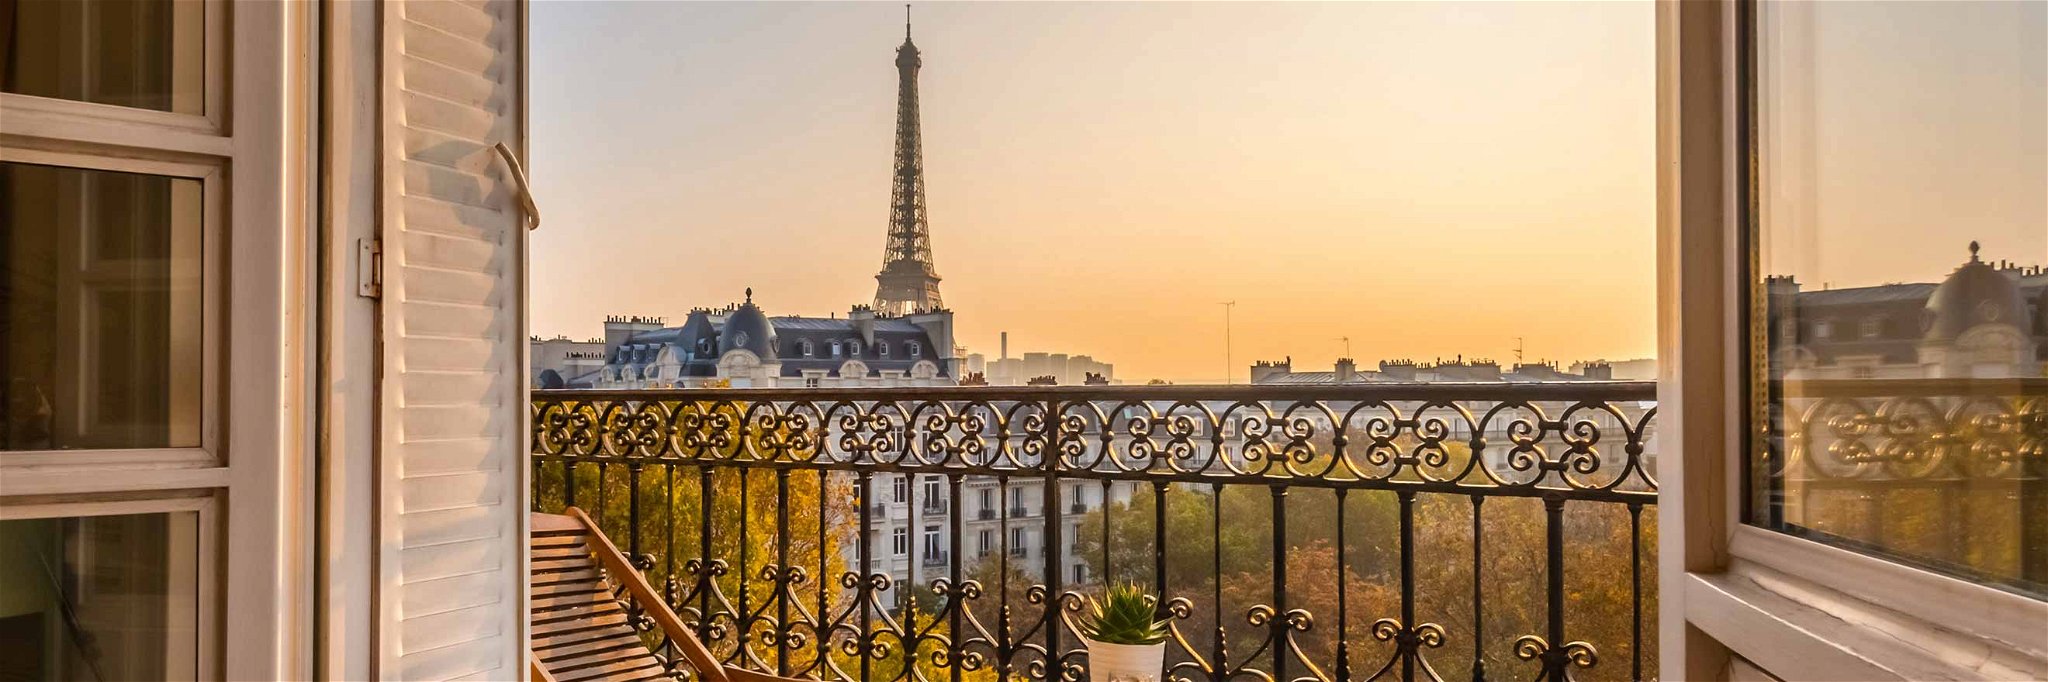 To accompany the gentle spring breeze, we recommend a dose of Parisian-style savoir-vivre.